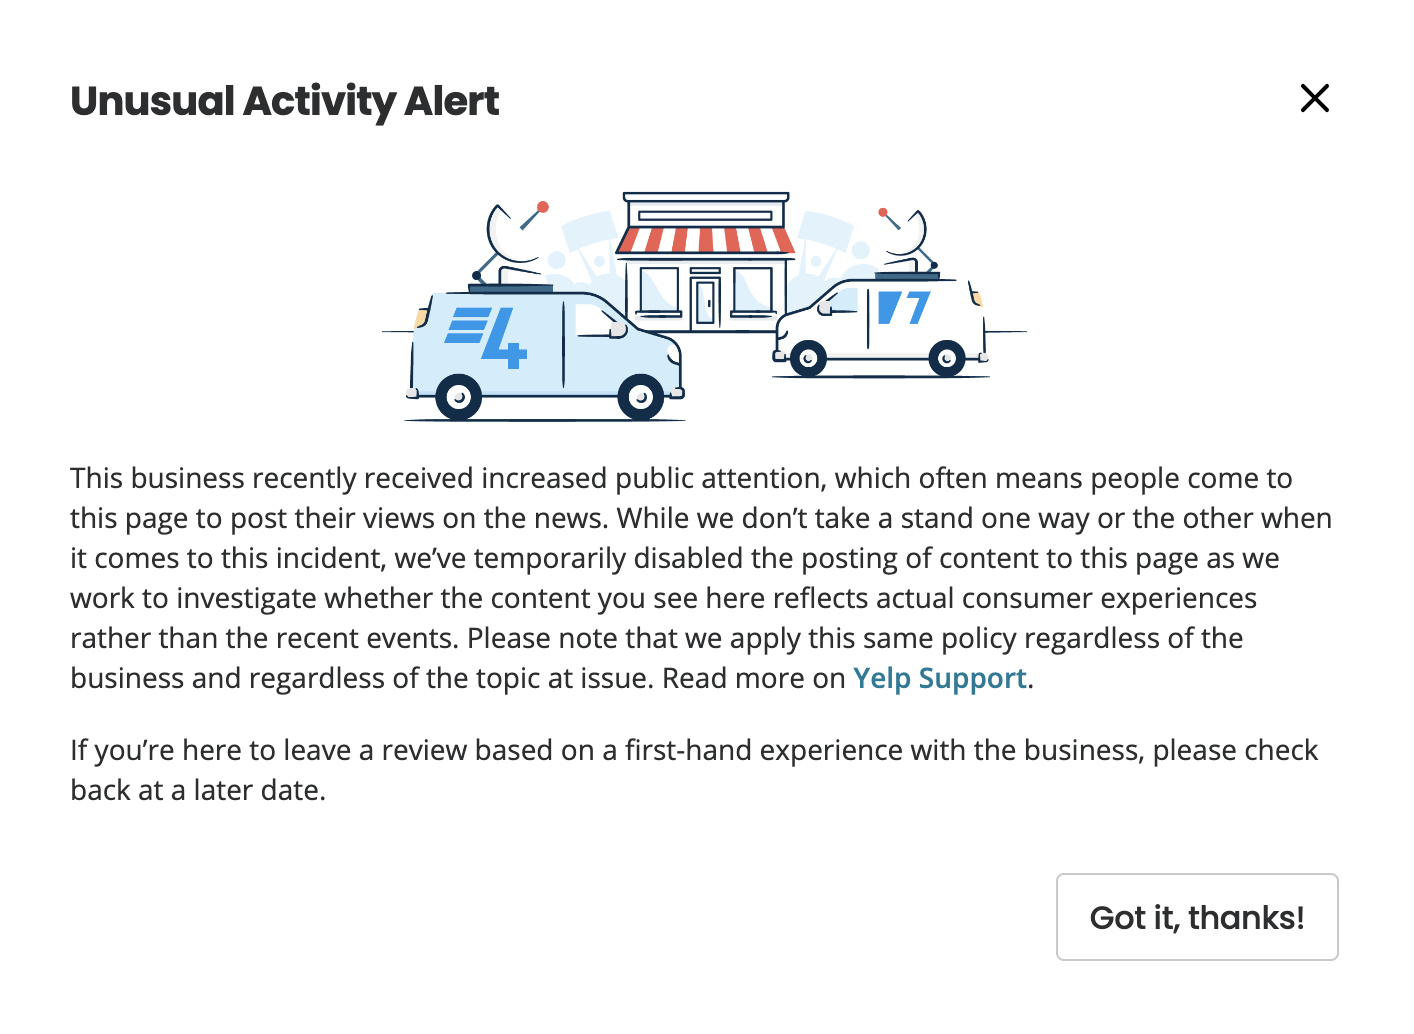 Pop-up alert on Yelp indicating &quot;we&#x27;ve temporarily disabled the posting of content&quot; for this business while they &quot;investigate whether the content you see here reflects actual consumer experiences rather than the recent events&quot;